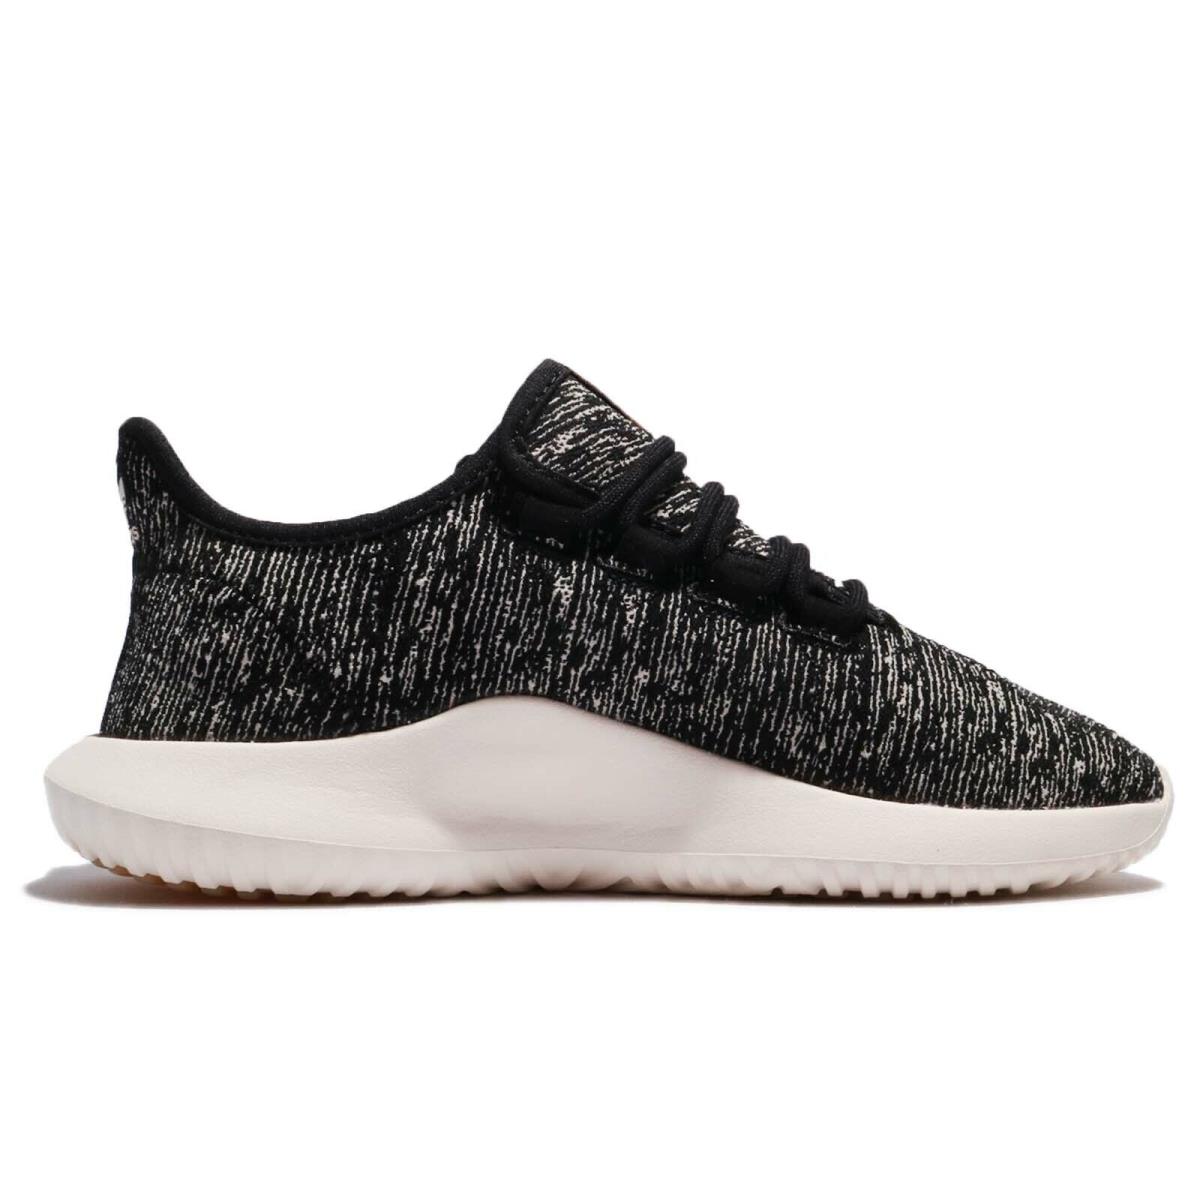 Adidas shoes tubular shadow - Black/Clear Brown/Off White 3